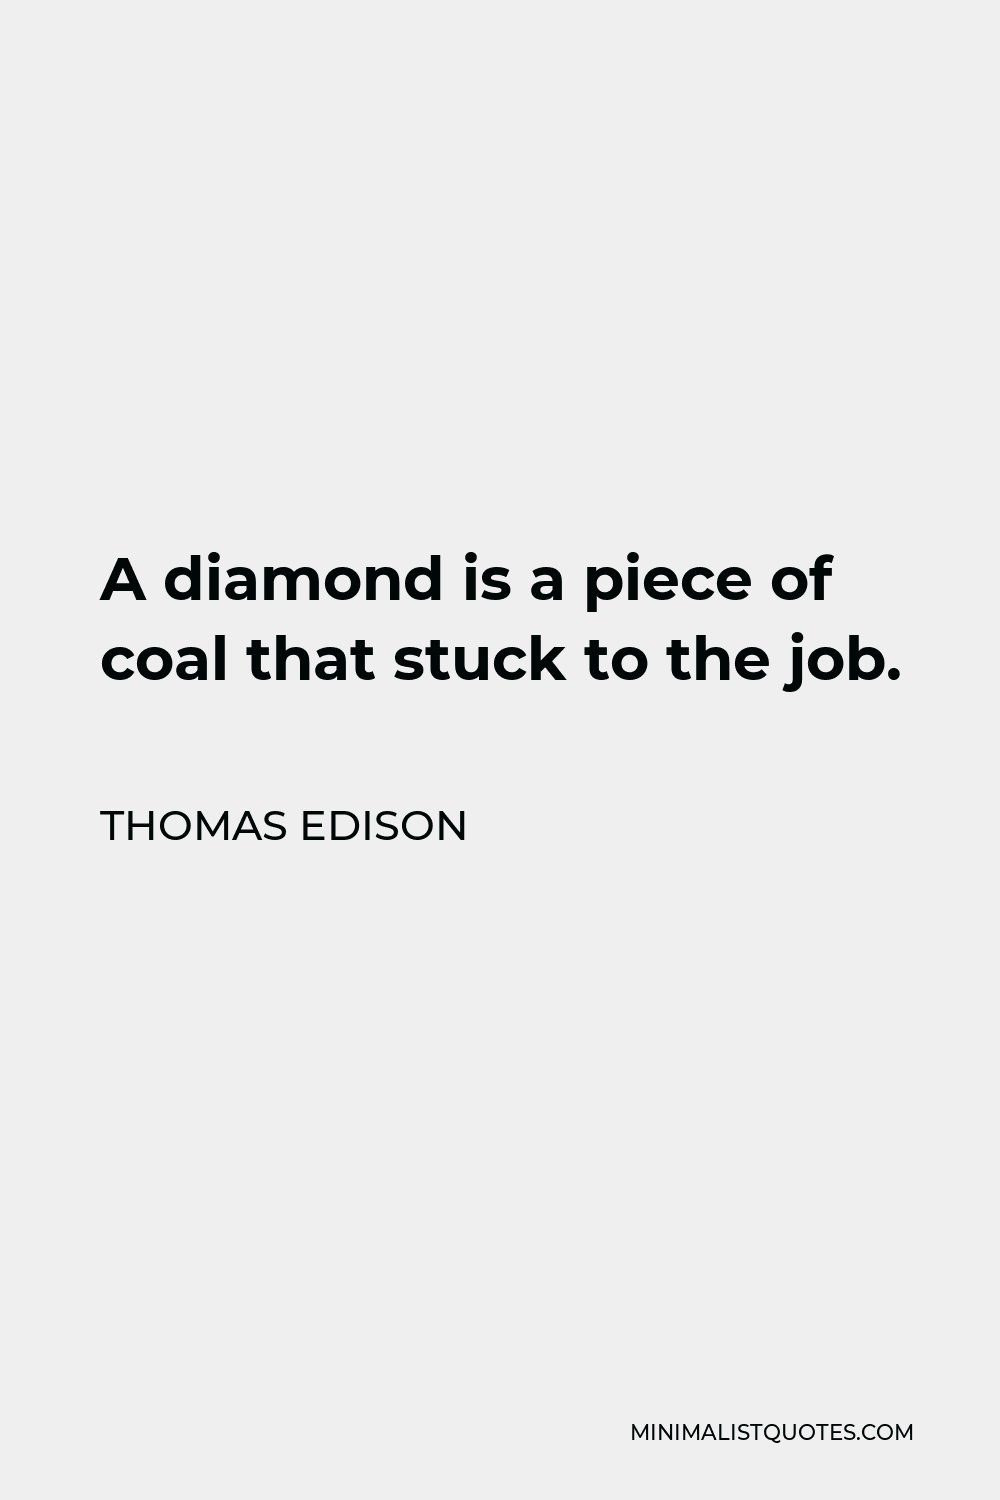 Thomas Edison Quote - A diamond is a piece of coal that stuck to the job.